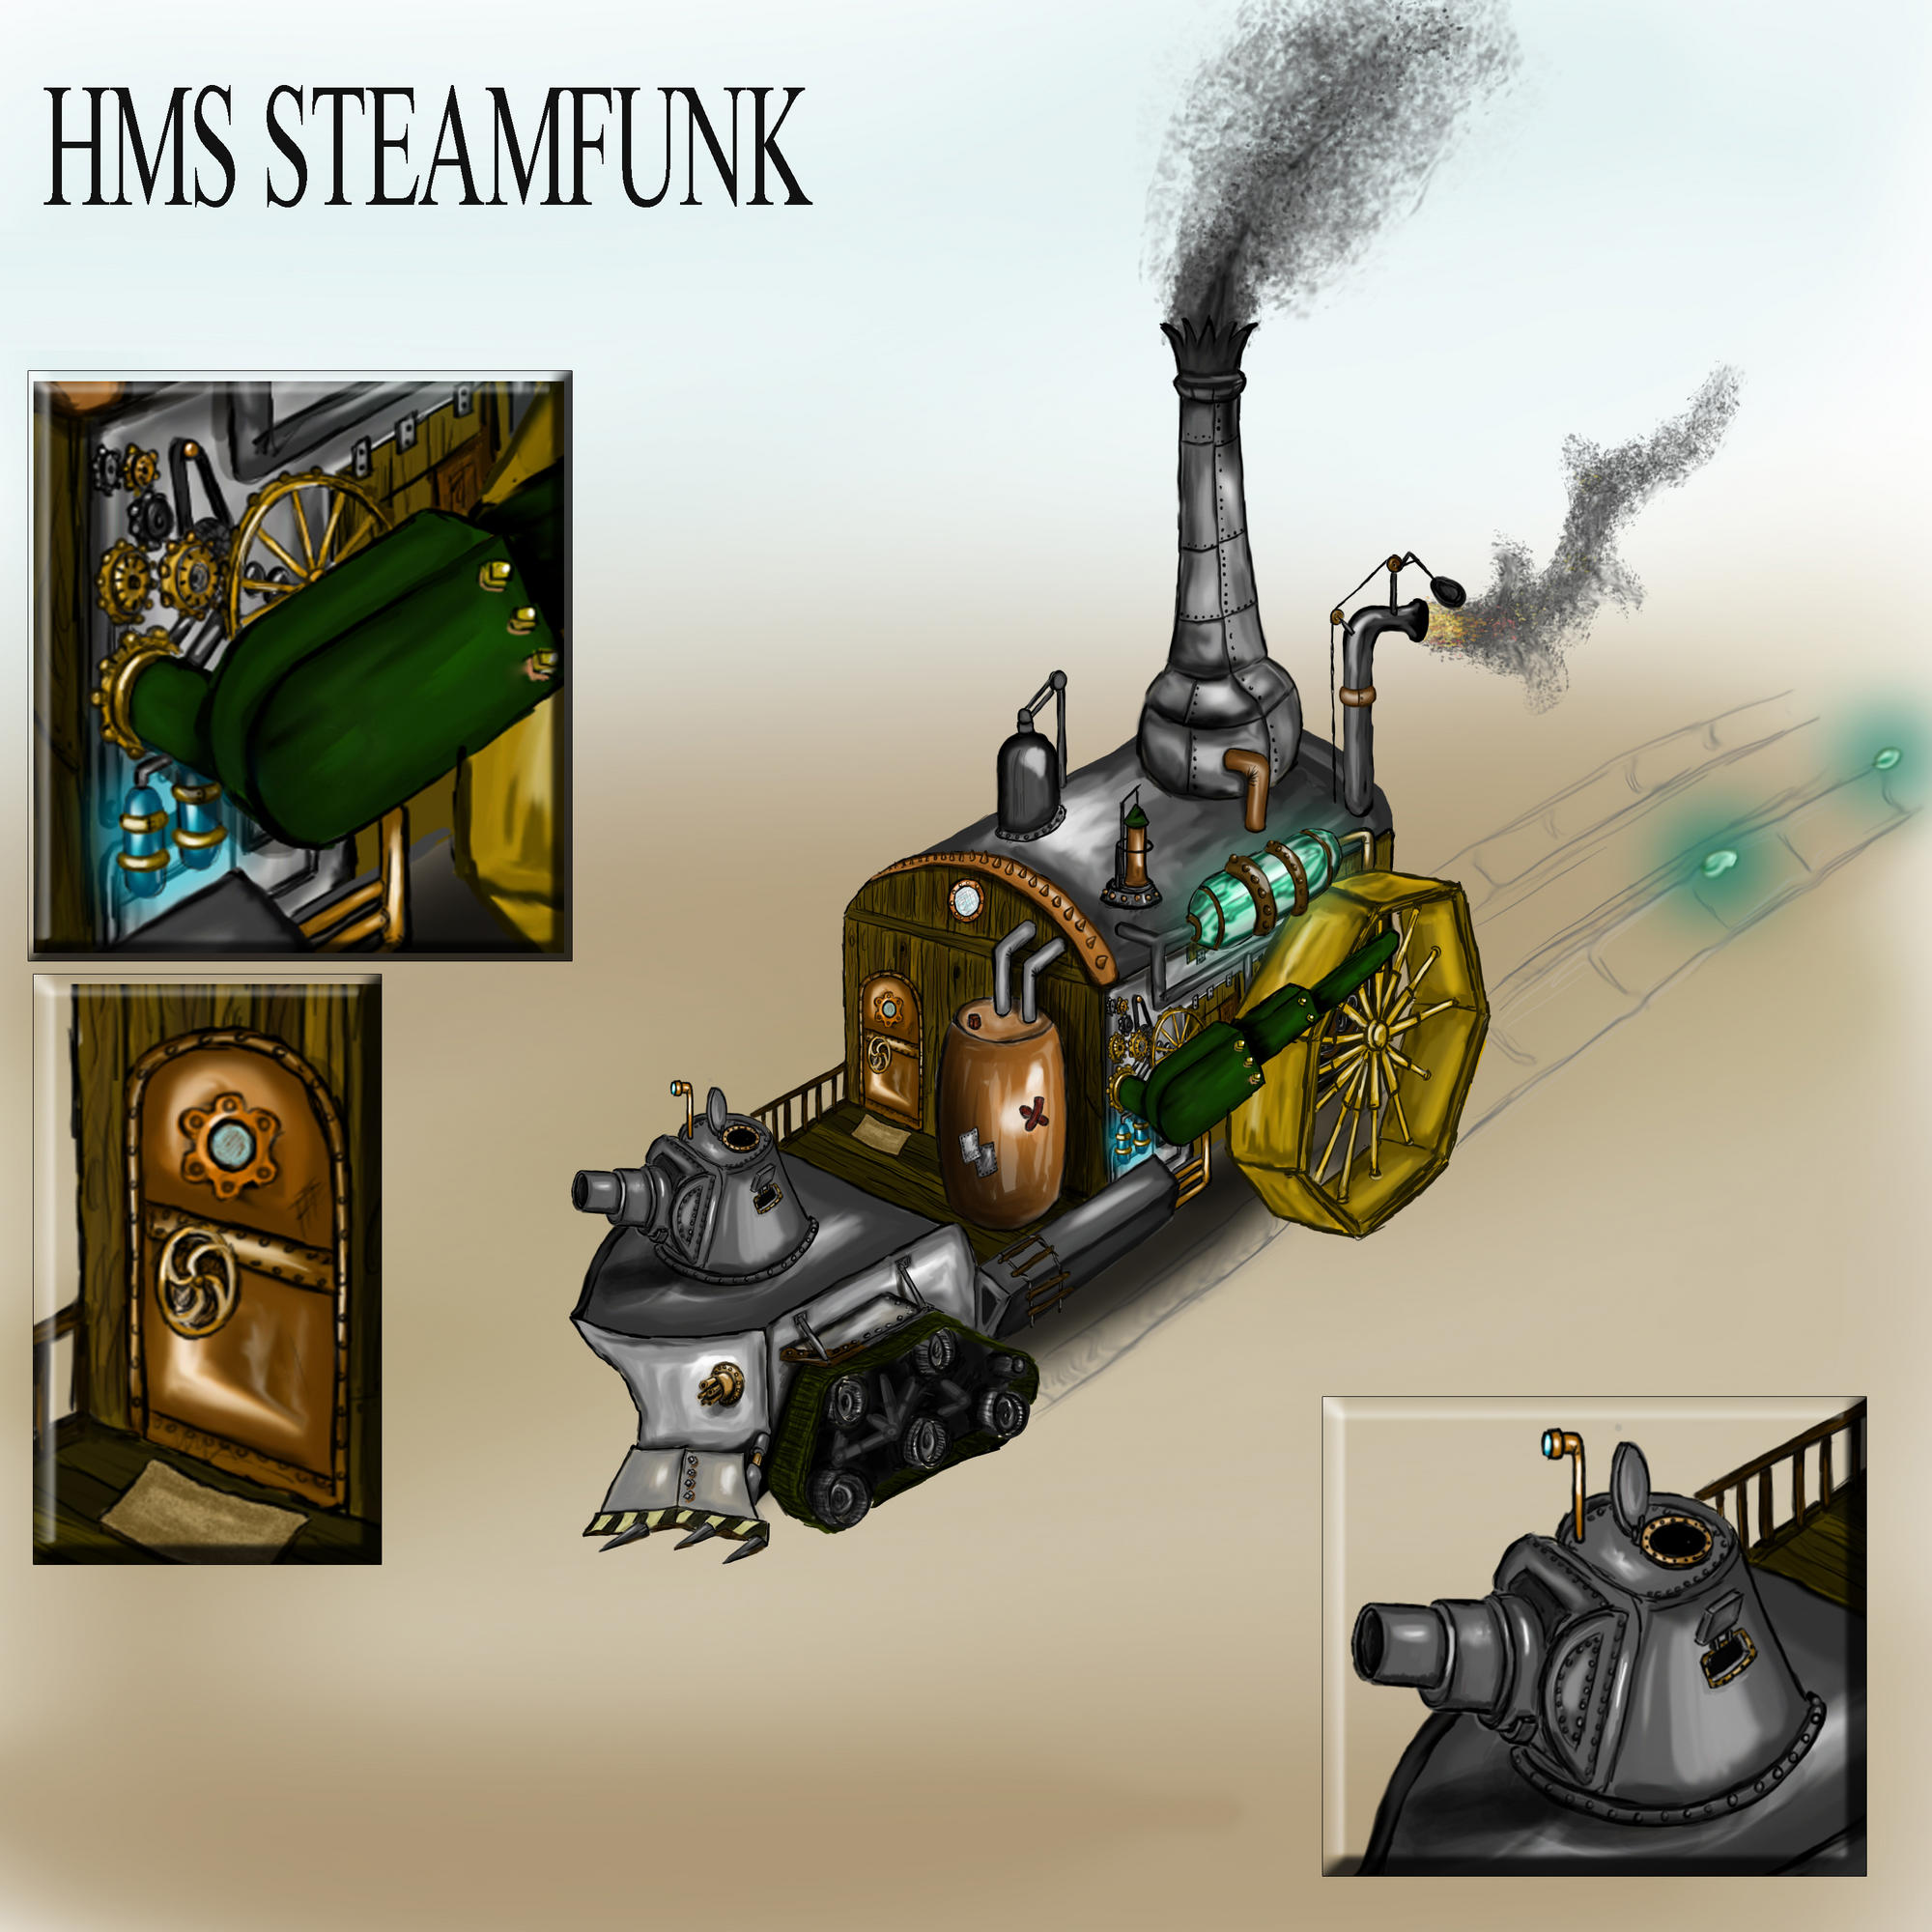 Steampunk ship (I drew for a art contest on THW)